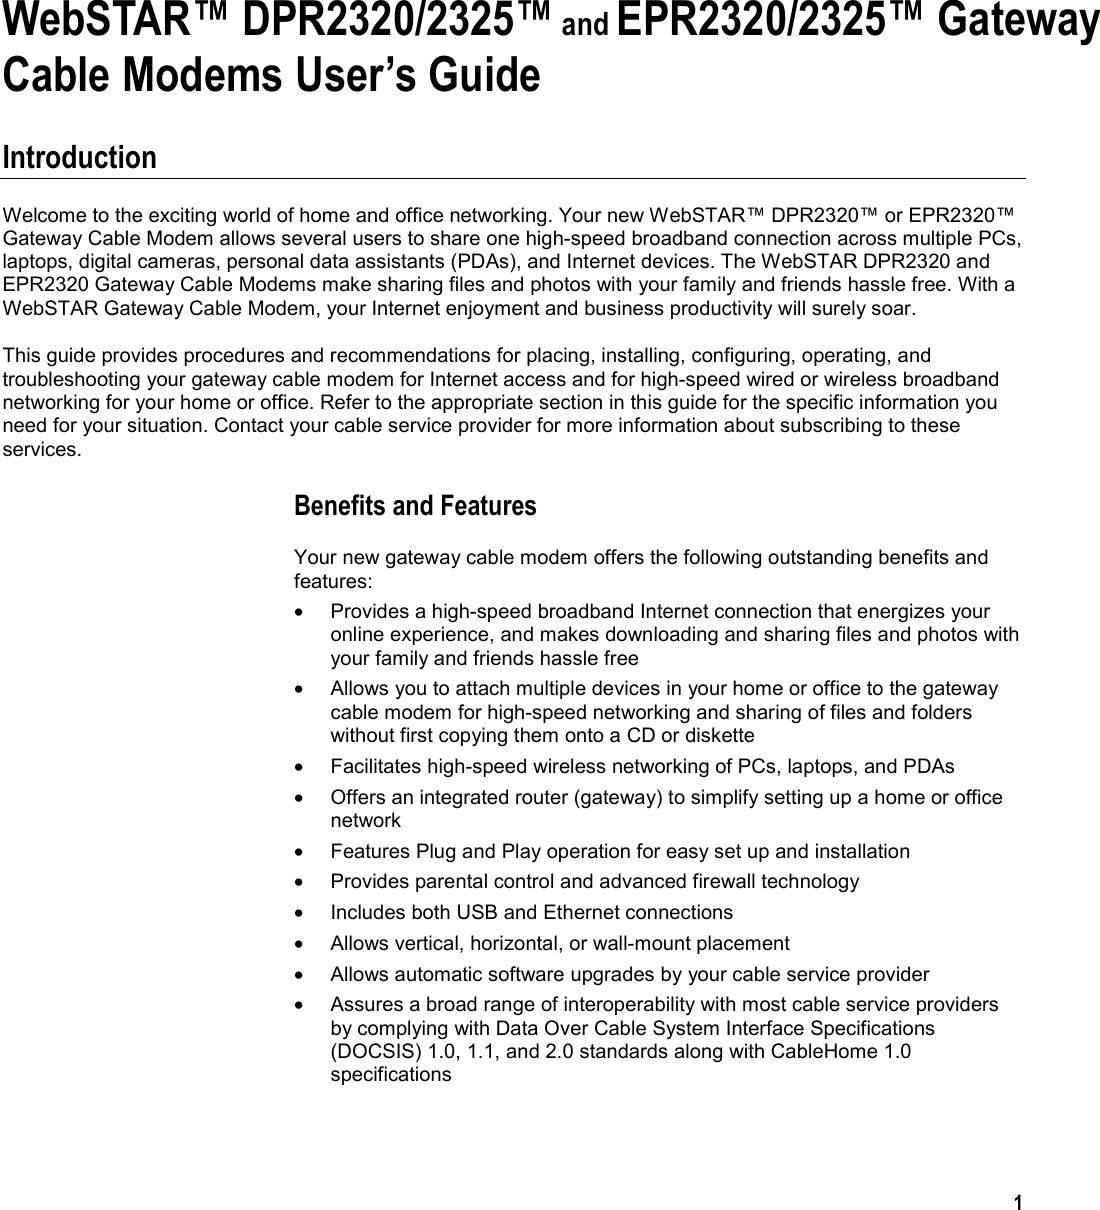 1WebSTAR™ DPR2320/2325™ and EPR2320/2325™ GatewayCable Modems User’s Guide Introduction Welcome to the exciting world of home and office networking. Your new WebSTAR™ DPR2320™ or EPR2320™ Gateway Cable Modem allows several users to share one high-speed broadband connection across multiple PCs, laptops, digital cameras, personal data assistants (PDAs), and Internet devices. The WebSTAR DPR2320 and EPR2320 Gateway Cable Modems make sharing files and photos with your family and friends hassle free. With a WebSTAR Gateway Cable Modem, your Internet enjoyment and business productivity will surely soar. This guide provides procedures and recommendations for placing, installing, configuring, operating, and troubleshooting your gateway cable modem for Internet access and for high-speed wired or wireless broadband networking for your home or office. Refer to the appropriate section in this guide for the specific information you need for your situation. Contact your cable service provider for more information about subscribing to these services. Benefits and Features Your new gateway cable modem offers the following outstanding benefits and features: •  Provides a high-speed broadband Internet connection that energizes your online experience, and makes downloading and sharing files and photos with your family and friends hassle free •  Allows you to attach multiple devices in your home or office to the gateway cable modem for high-speed networking and sharing of files and folders without first copying them onto a CD or diskette •  Facilitates high-speed wireless networking of PCs, laptops, and PDAs •  Offers an integrated router (gateway) to simplify setting up a home or office network •  Features Plug and Play operation for easy set up and installation •  Provides parental control and advanced firewall technology •  Includes both USB and Ethernet connections •  Allows vertical, horizontal, or wall-mount placement •  Allows automatic software upgrades by your cable service provider •  Assures a broad range of interoperability with most cable service providers by complying with Data Over Cable System Interface Specifications (DOCSIS) 1.0, 1.1, and 2.0 standards along with CableHome 1.0 specifications 